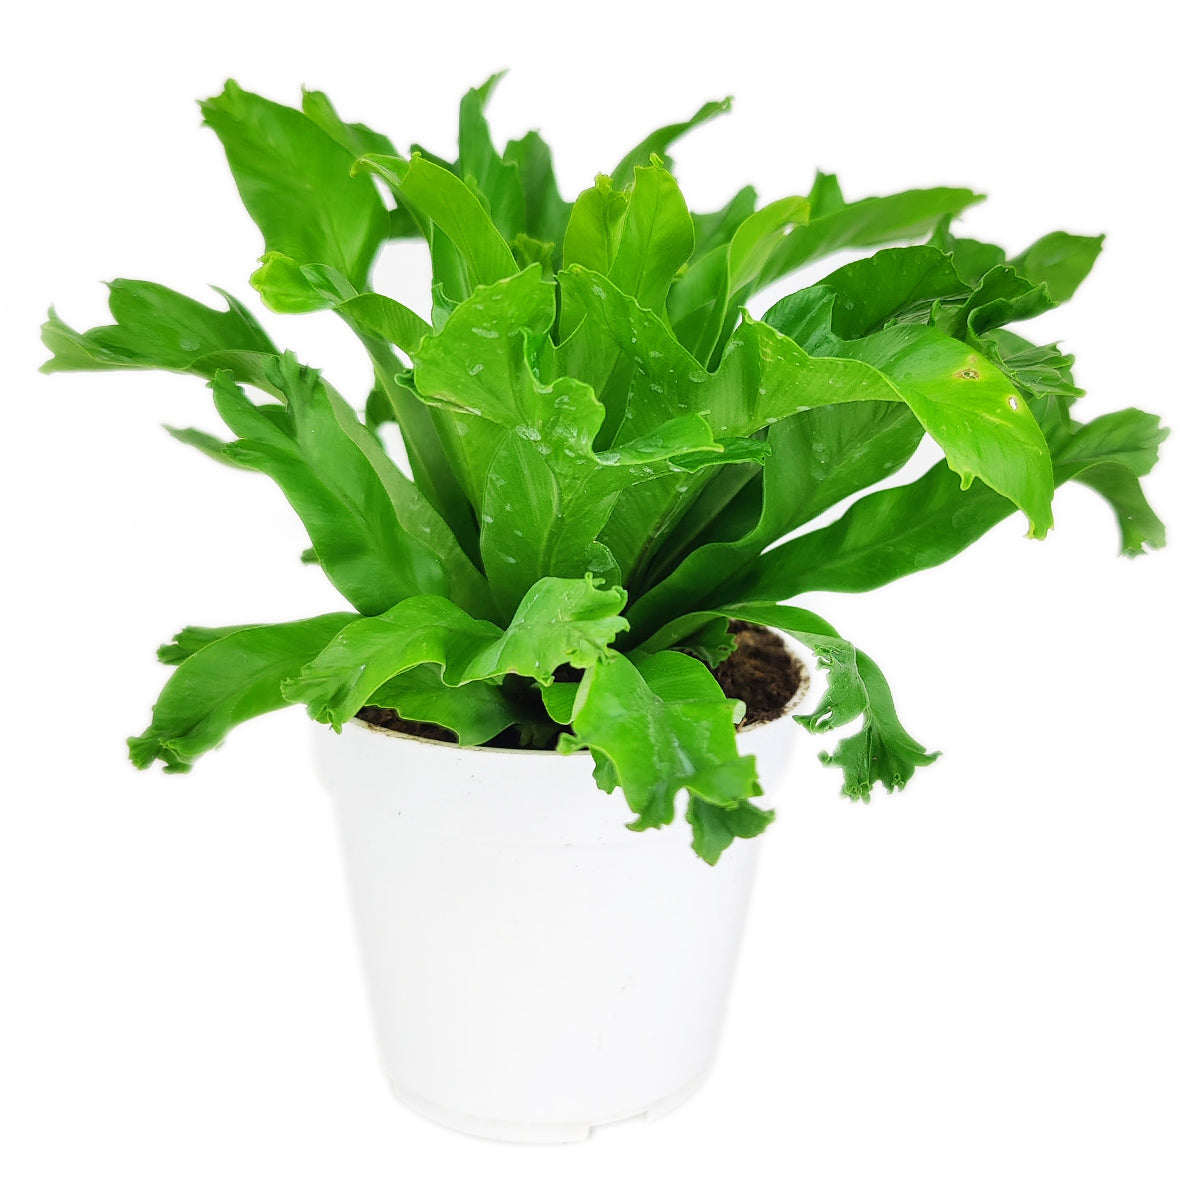 Crissie Fern for sale, Asplenium antiquum ‘Crissie’, how to care for Forked Bird’s Nest Fern, easy care air-purifying plant, medium and low light houseplant, most popular plant for homes and offices